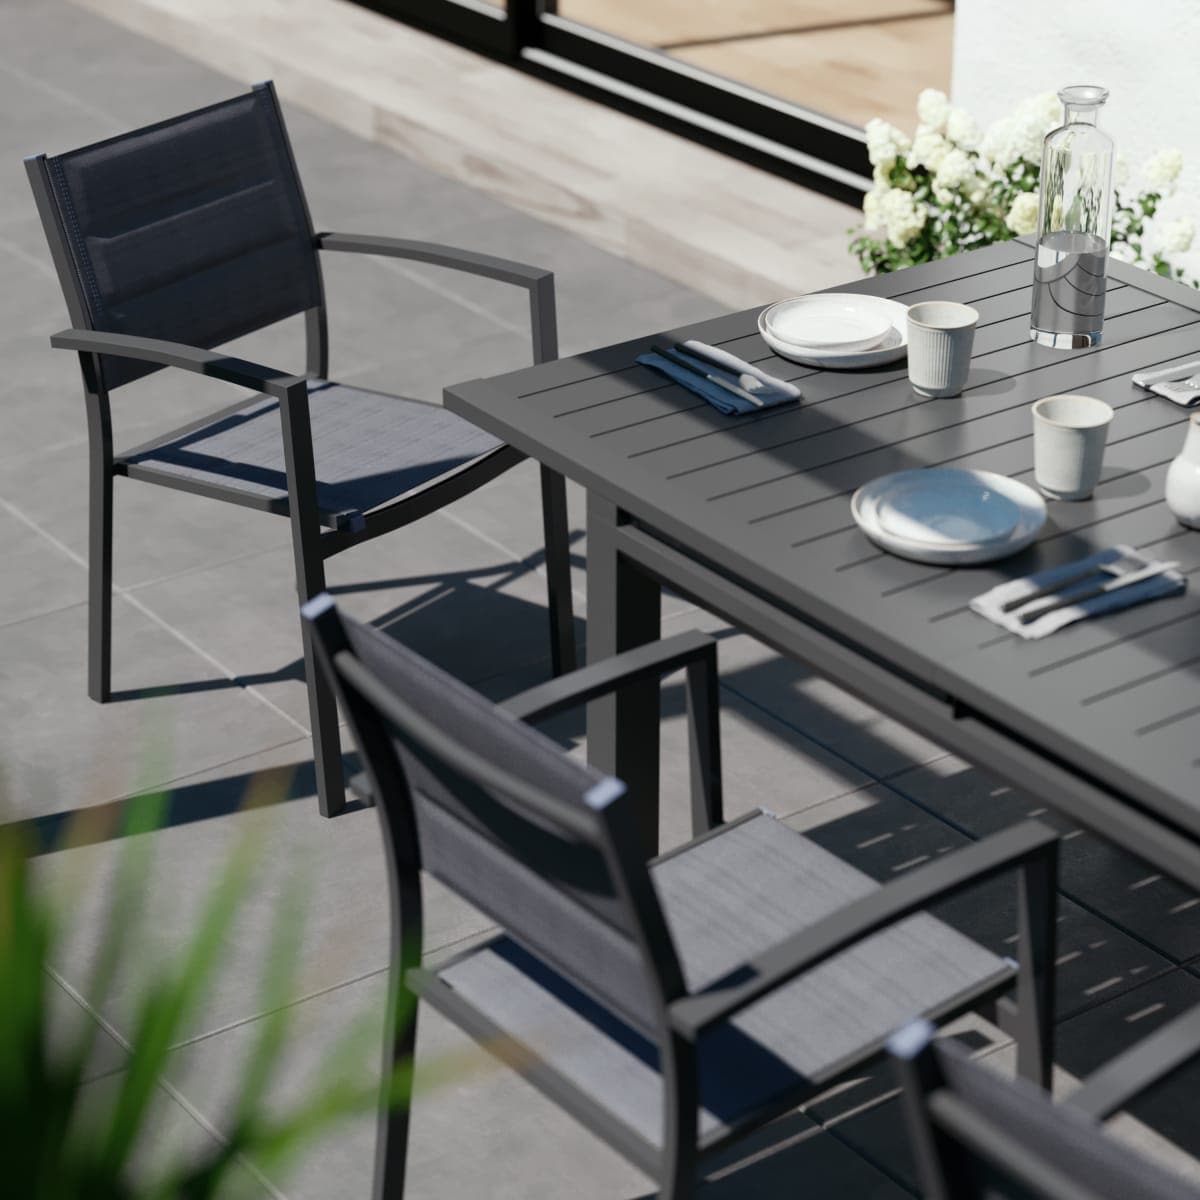 ODYSSEA II NATERIAL 180/240X100 ANTHRACITE EXTENDING TABLE